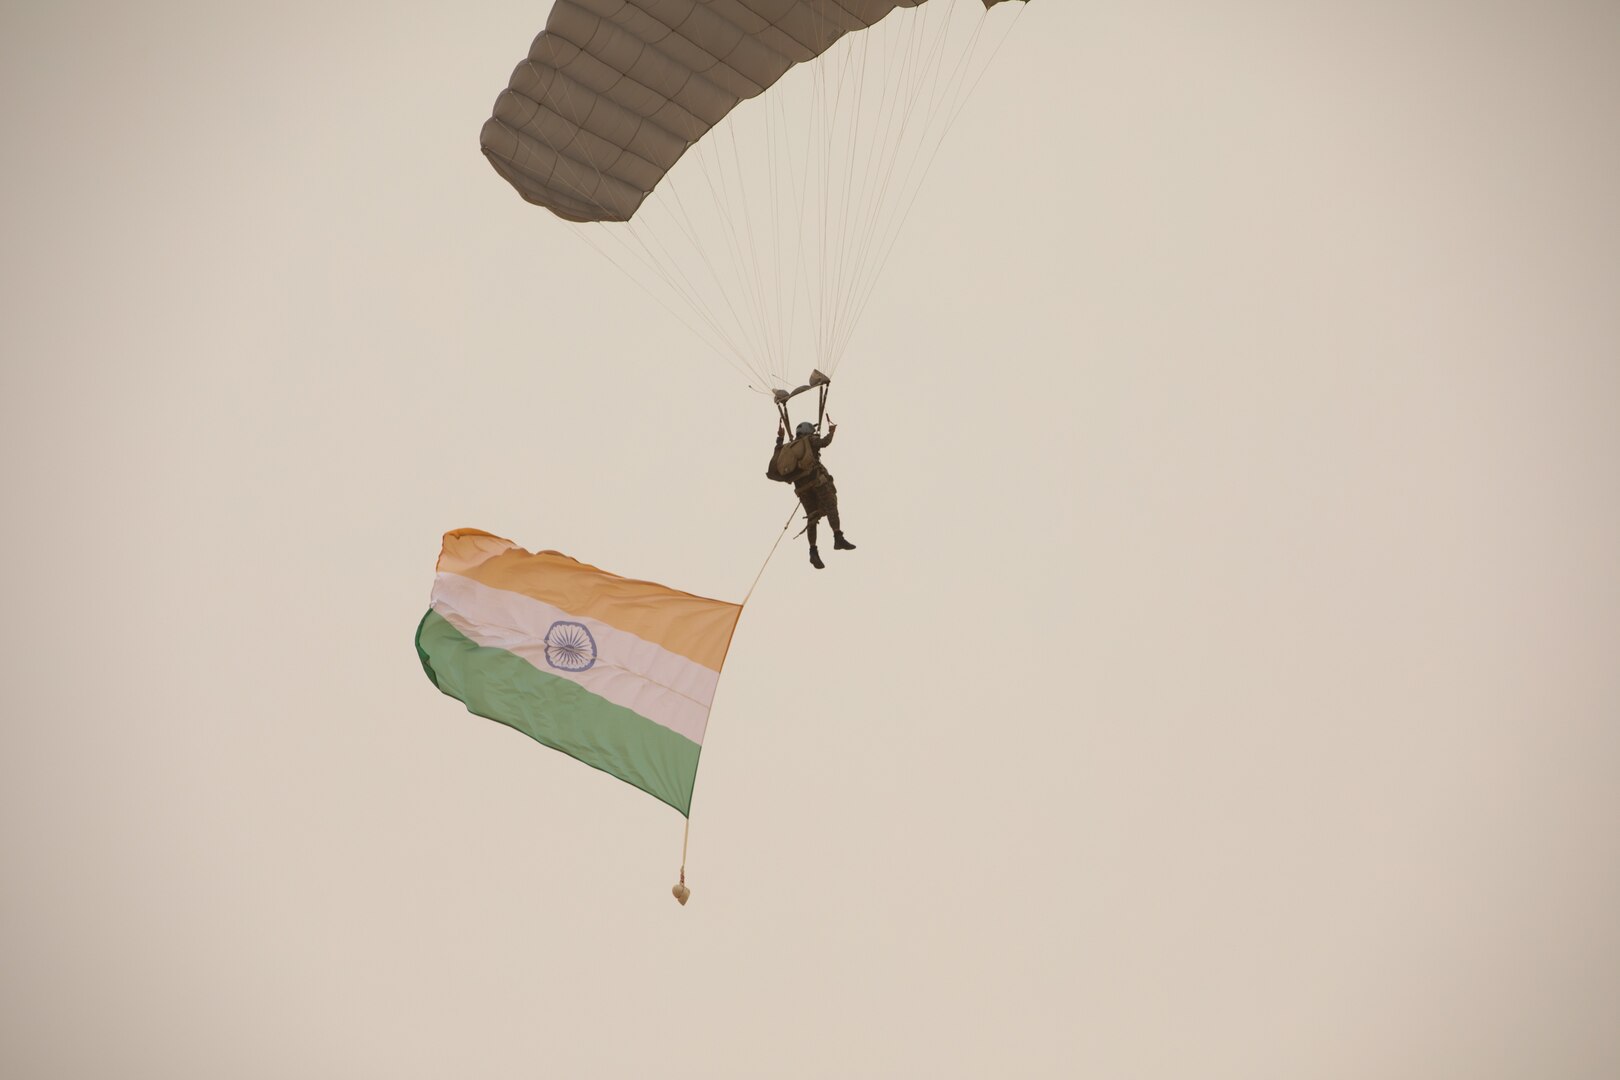 A foreign soldier flies an Indian flag while parachuting.